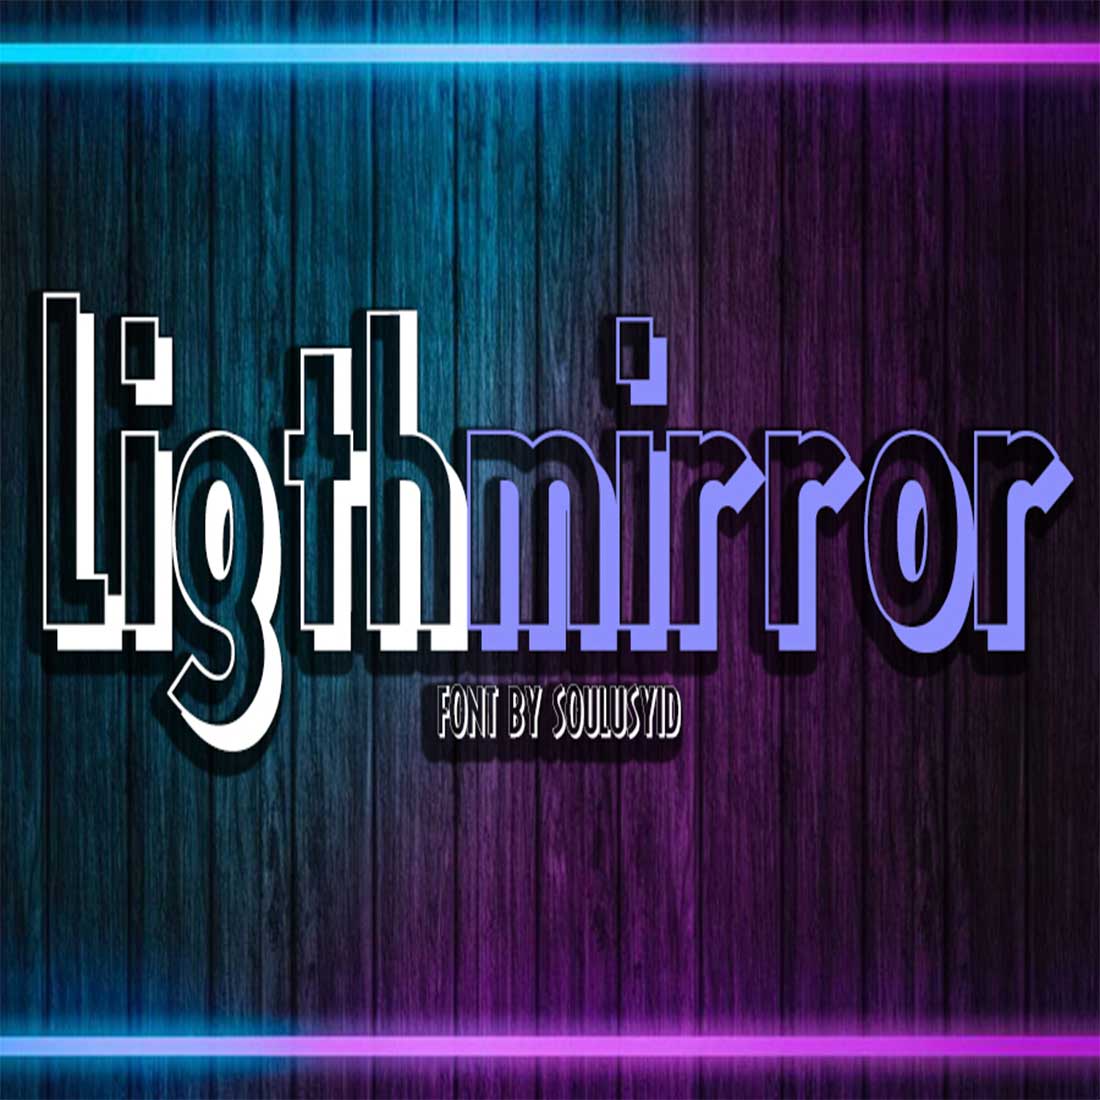 Ligthmirror cover image.